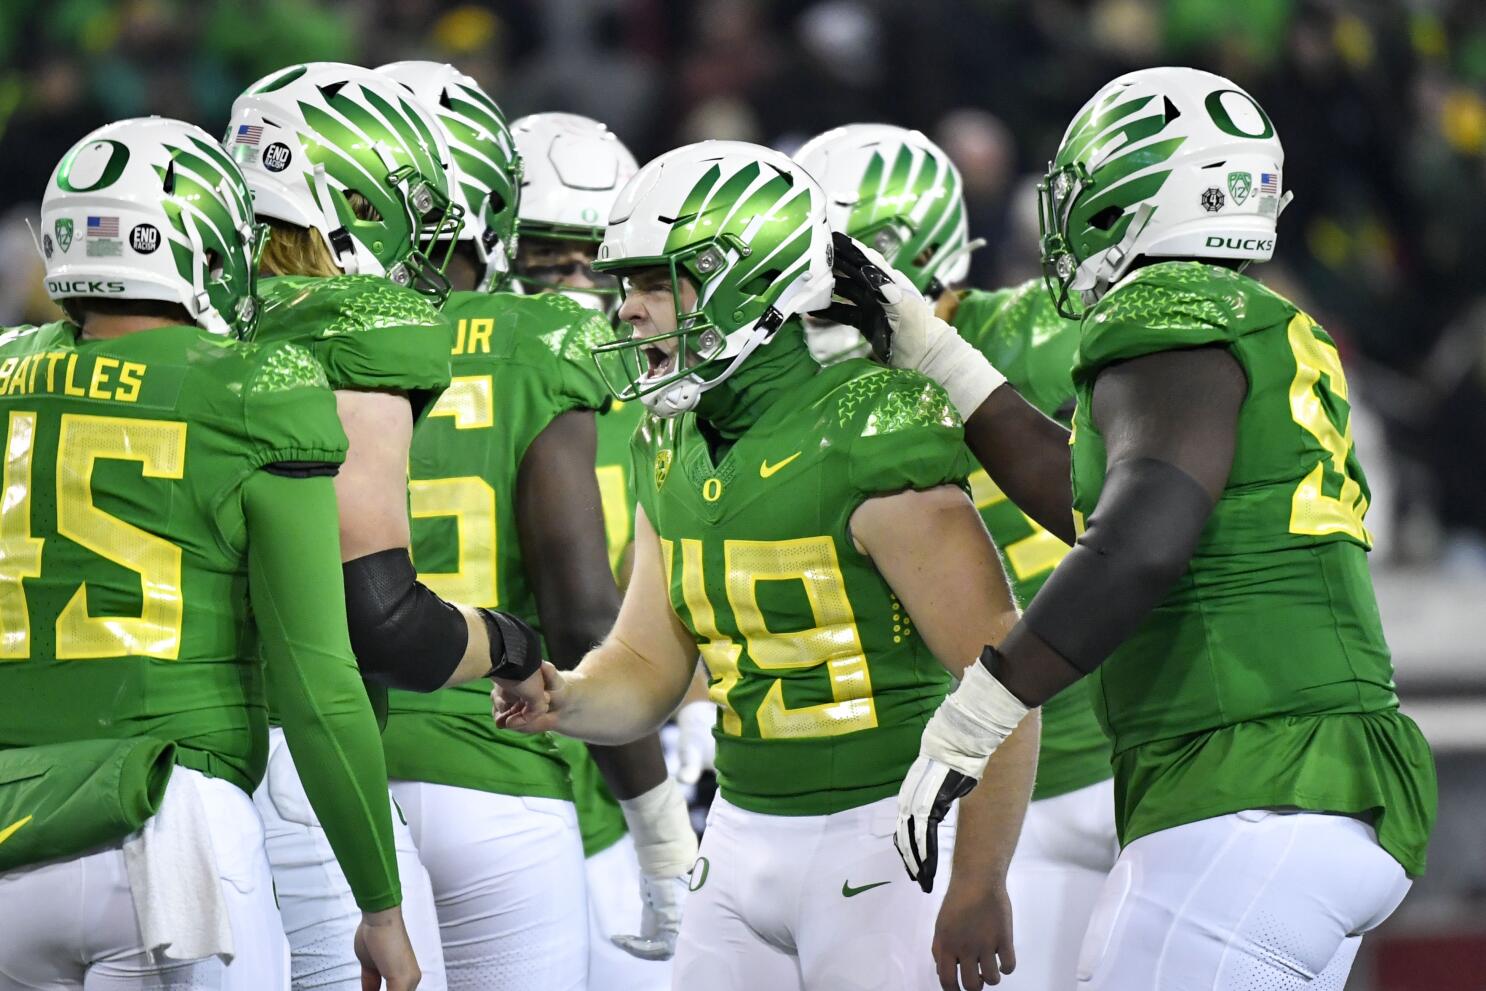 USC may not be able to escape its Oregon problem in the Big Ten